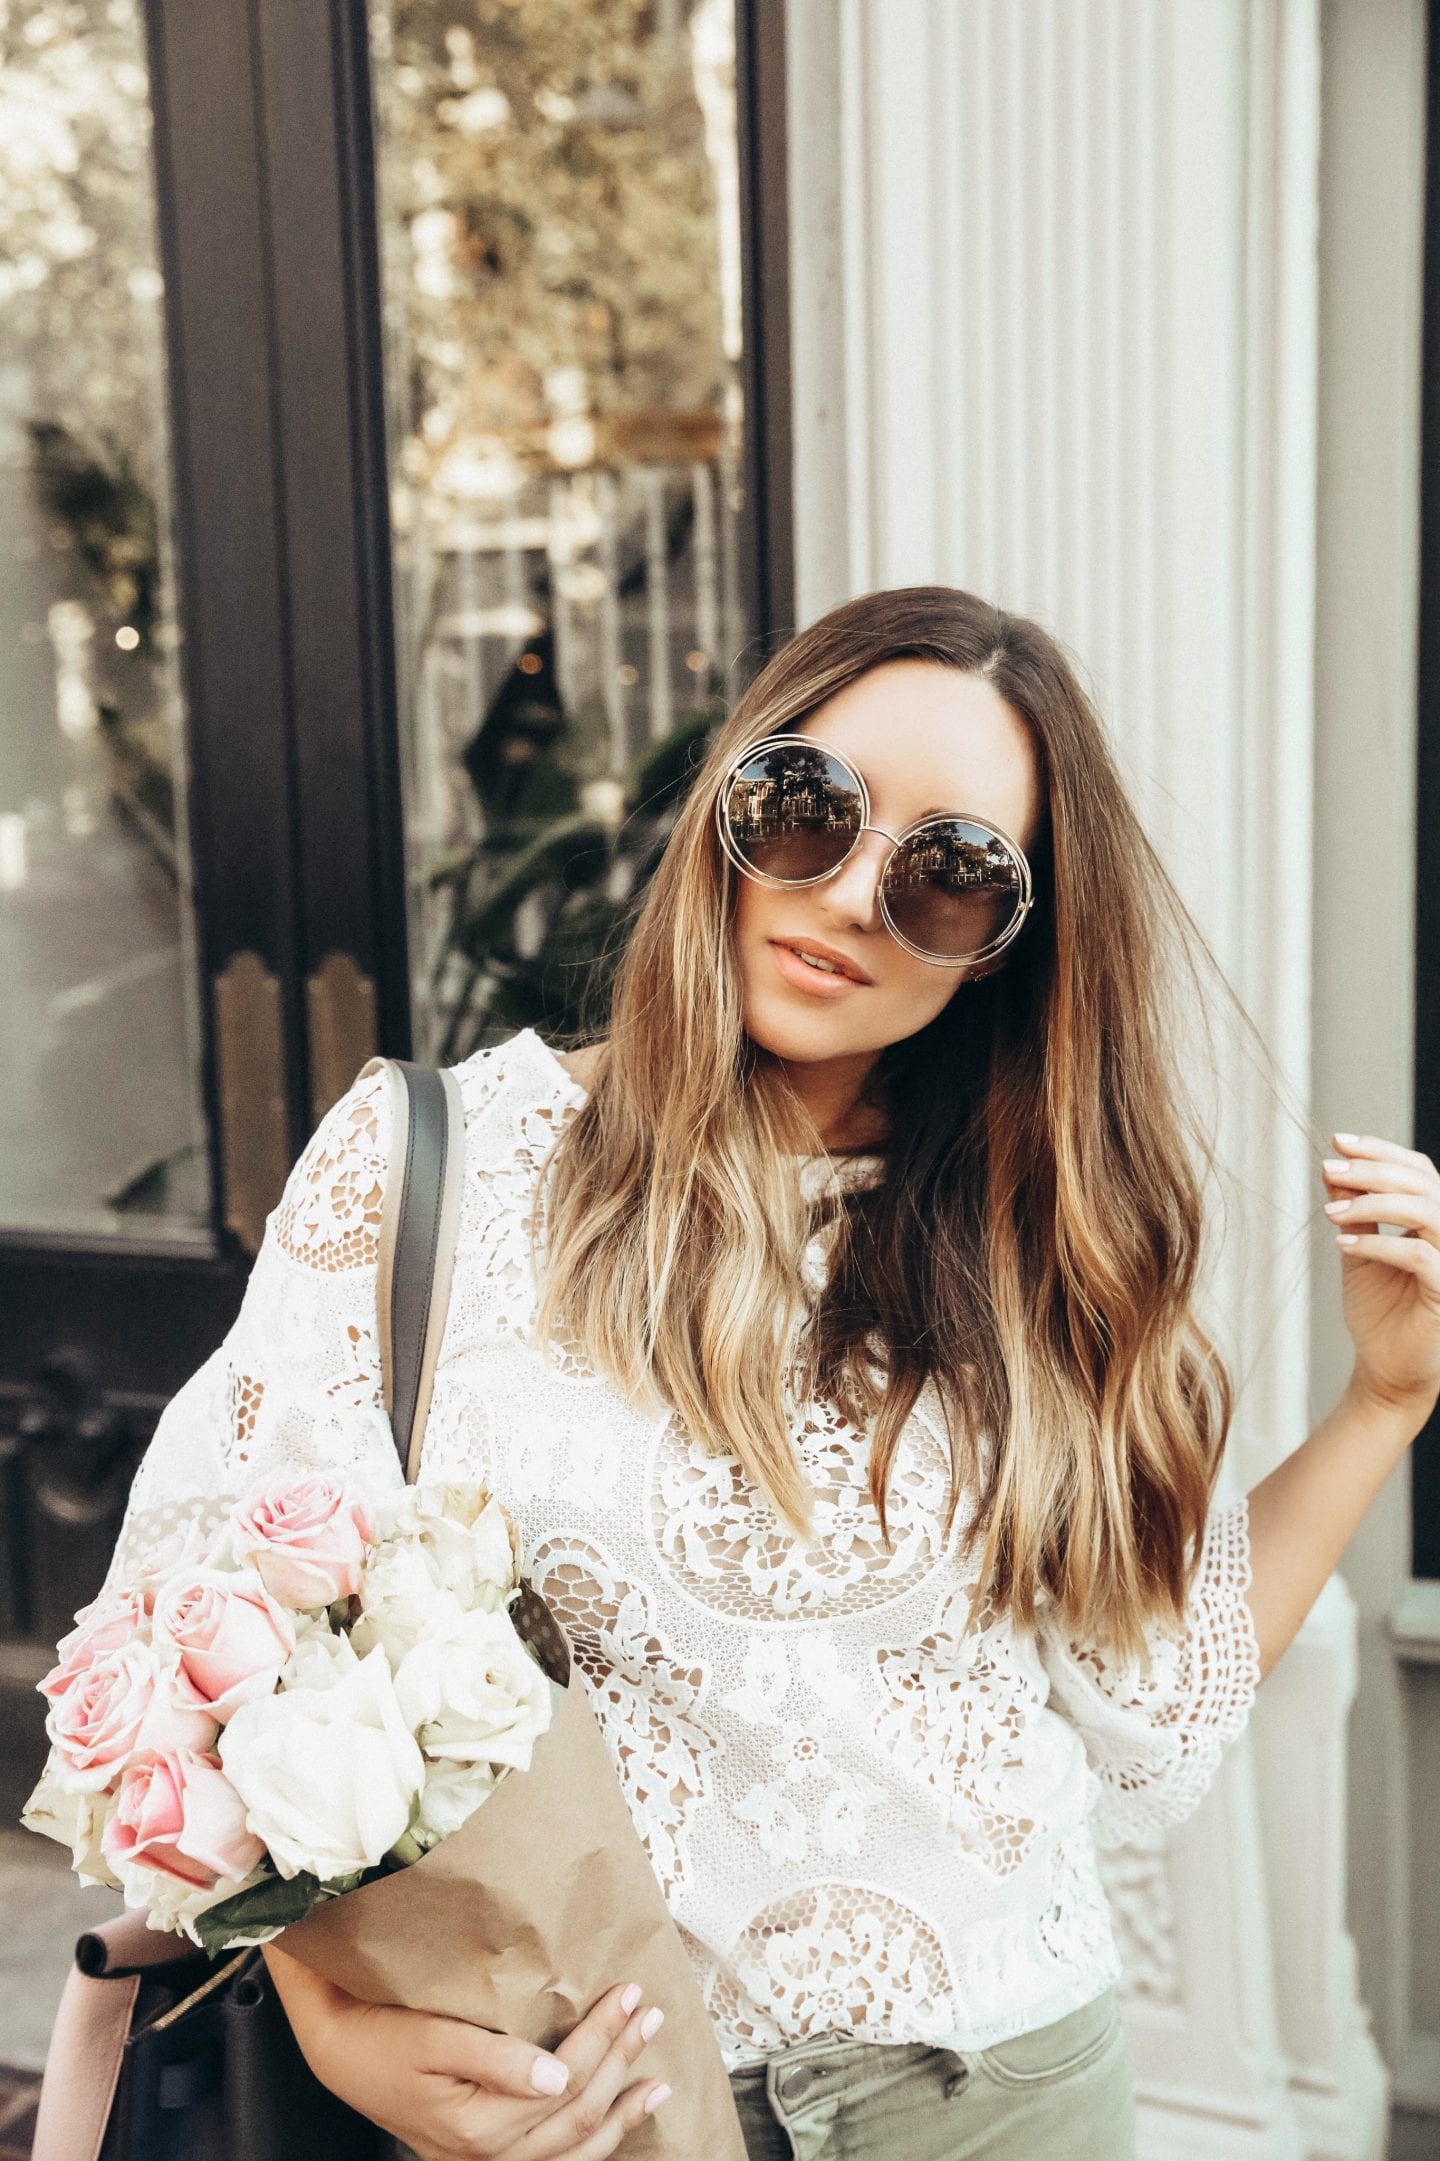 living proof hair | Living Proof Hair Products by popular San Francisco lifestyle blog, Just Add Glam: image of a woman standing outside, holding a bouquet of white and pink roses and running her fingers through her hair. 